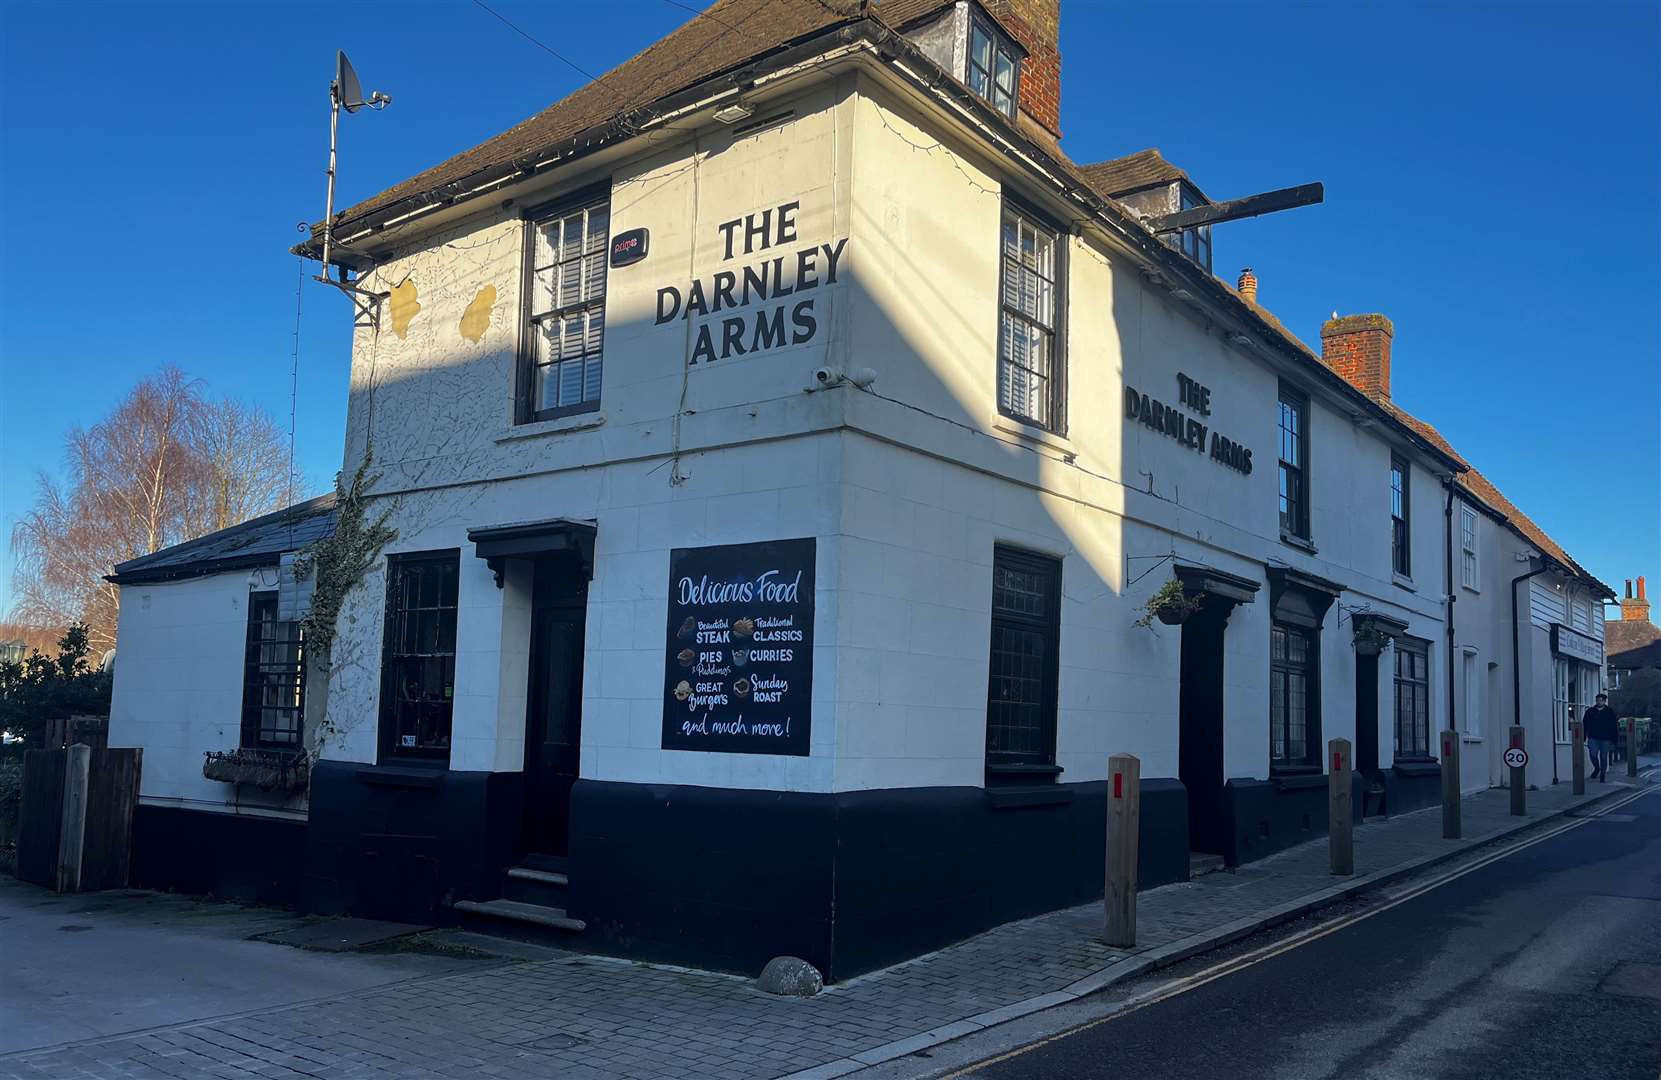 The Darnley Arms could lose Valentine's Day customers if they think they can't get access